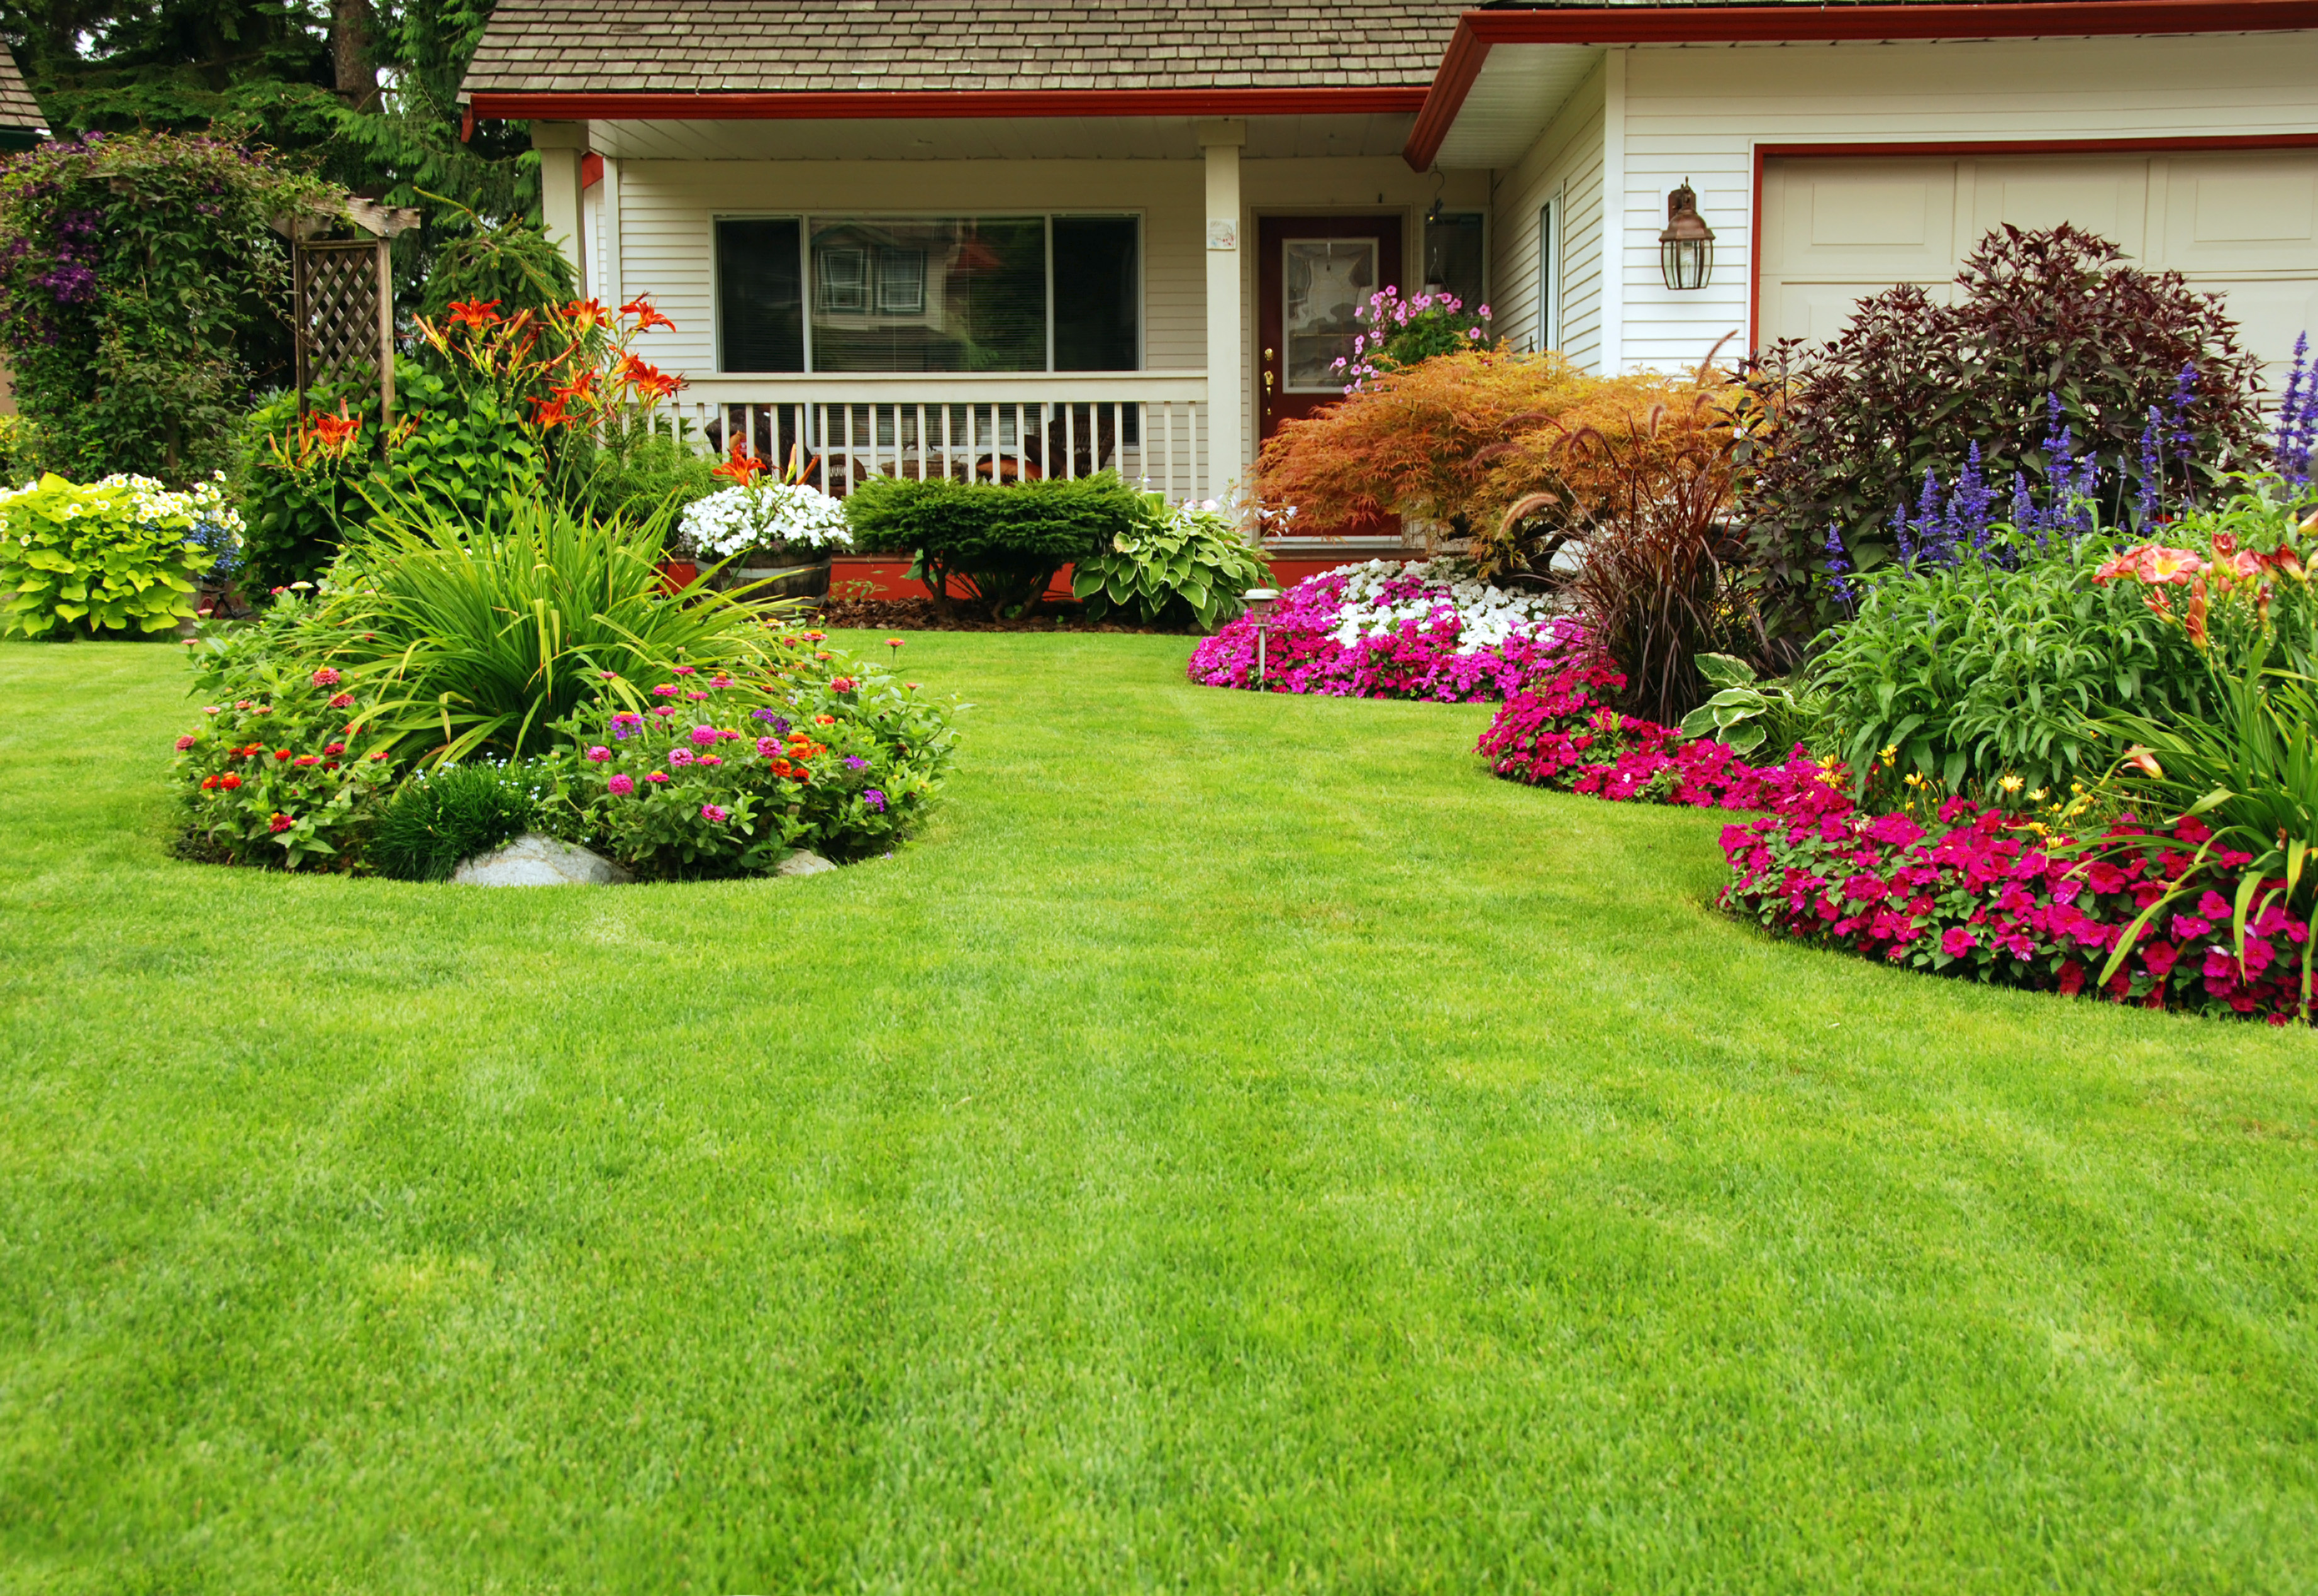 Spring Lawn Maintenance: A Complete Guide of Spring Lawn Care Tips